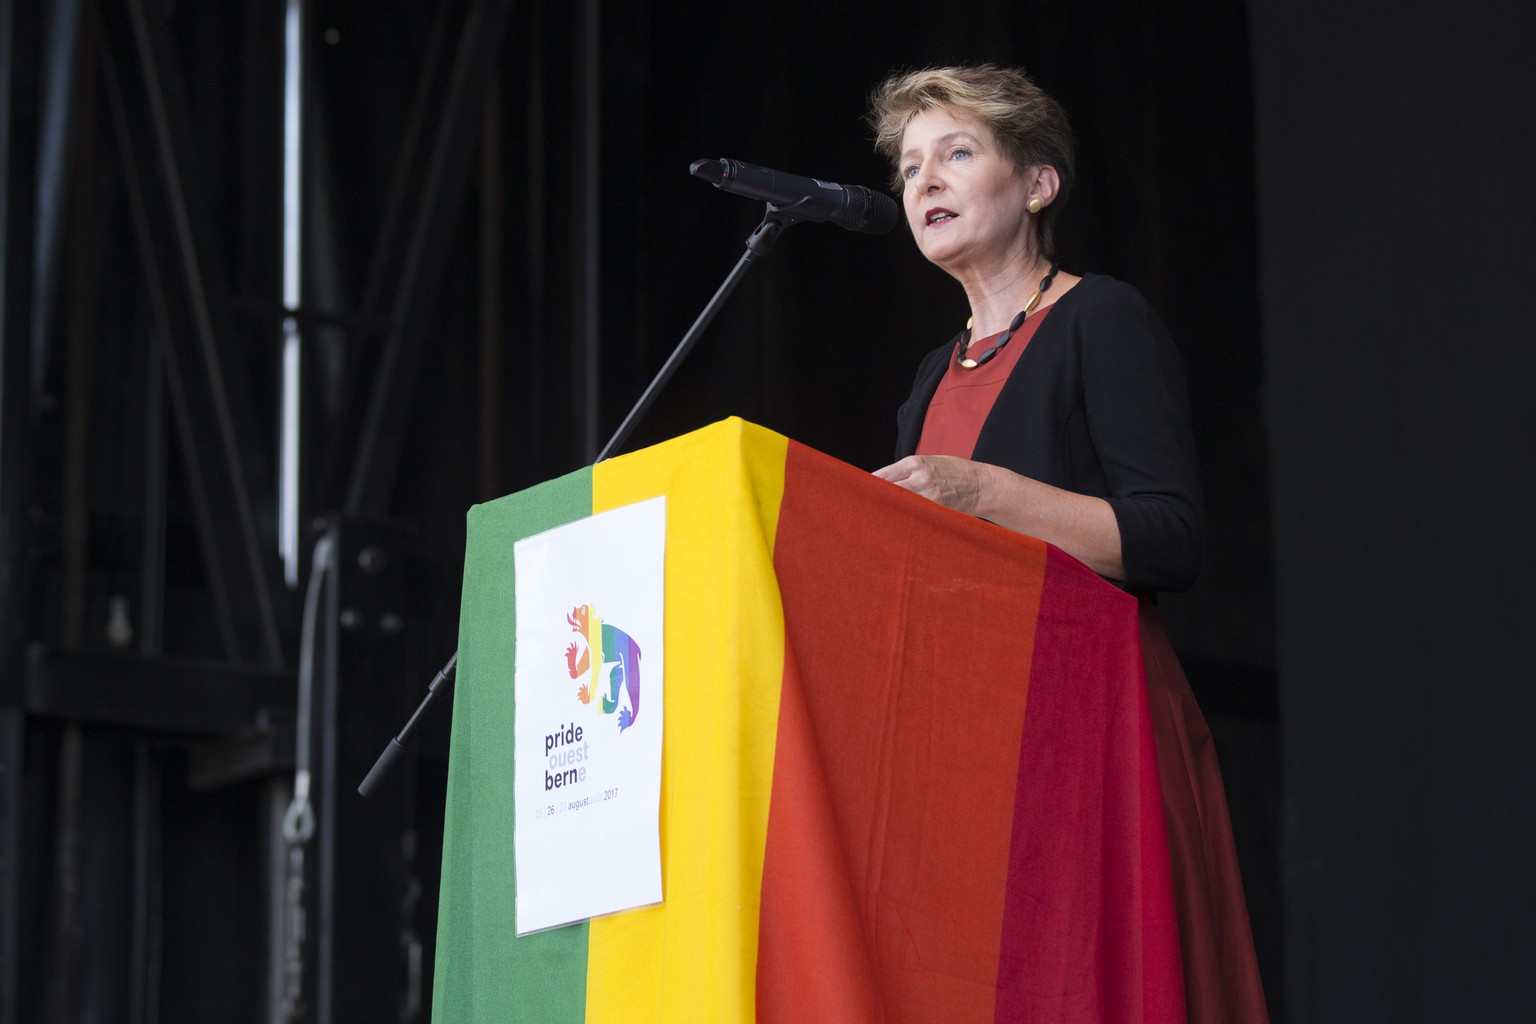 Federal Councillor Simonetta Sommaruga speaks during the &quot;Pride Ouest Berne&quot; in the city of Bern, Switzerland, Saturday, August 26, 2017. (KEYSTONE/Peter Klaunzer)